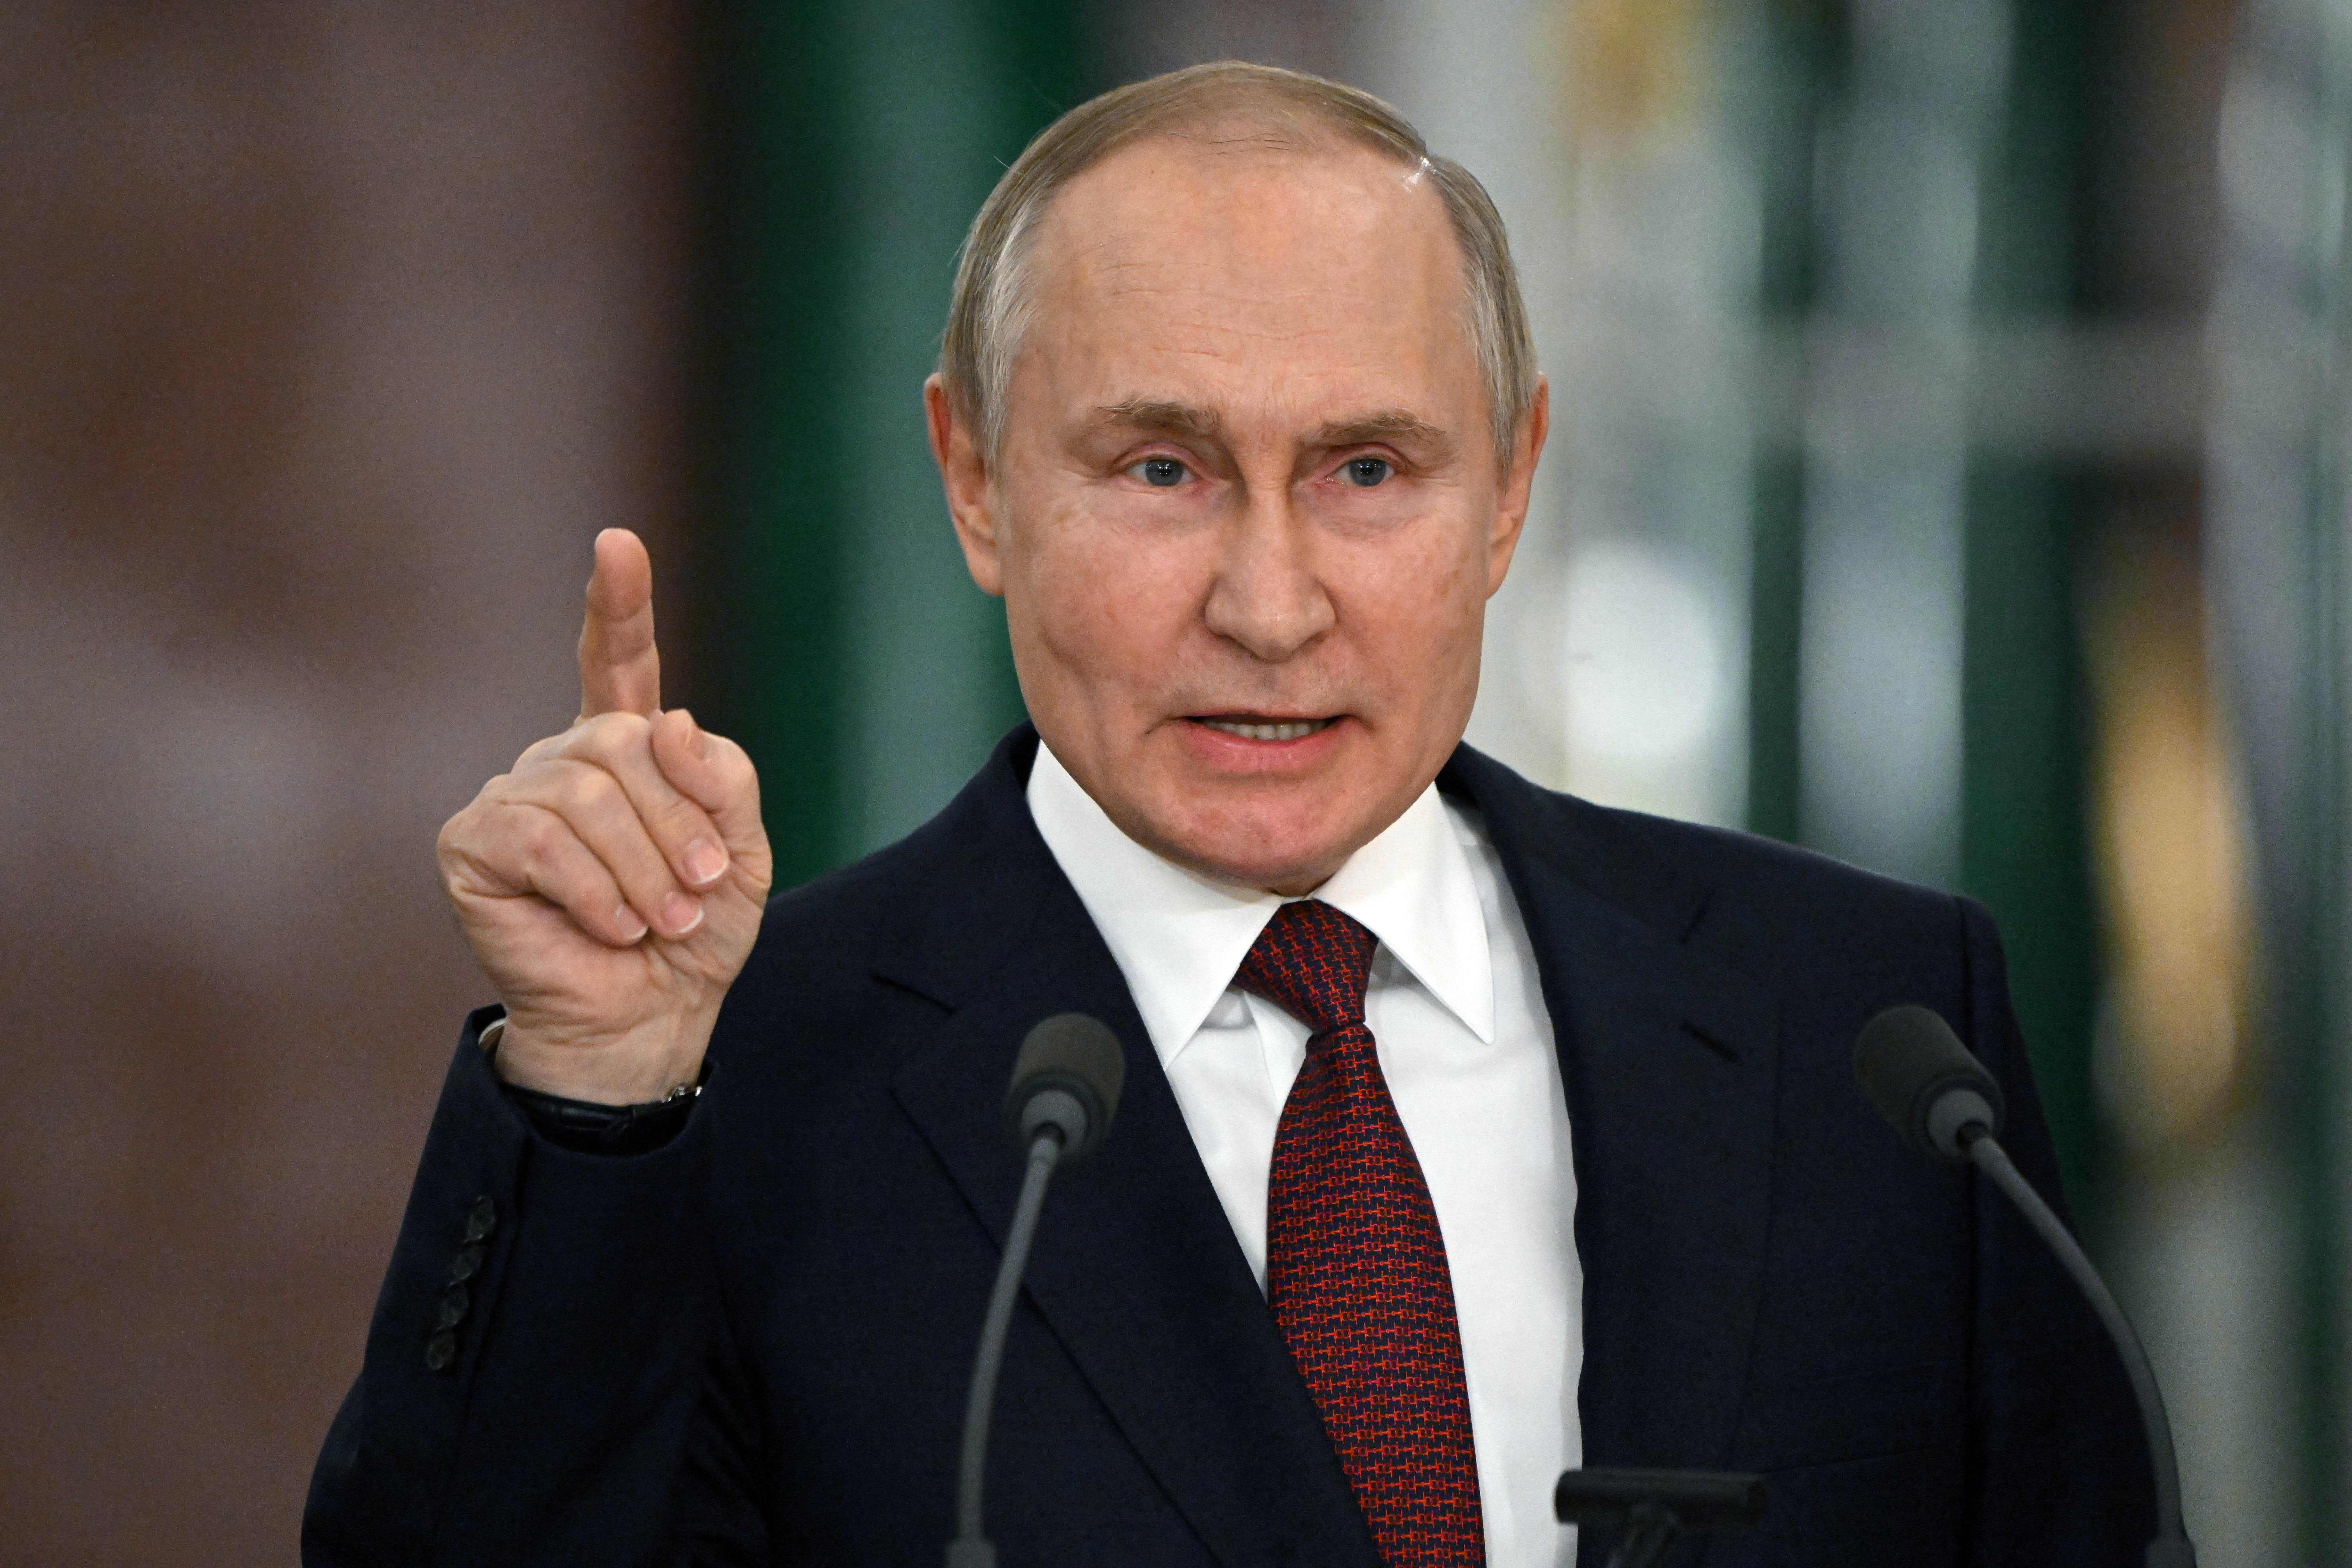 Putin declared that he wanted to negotiate the end of the war, but affirmed that Ukraine and the West refuse